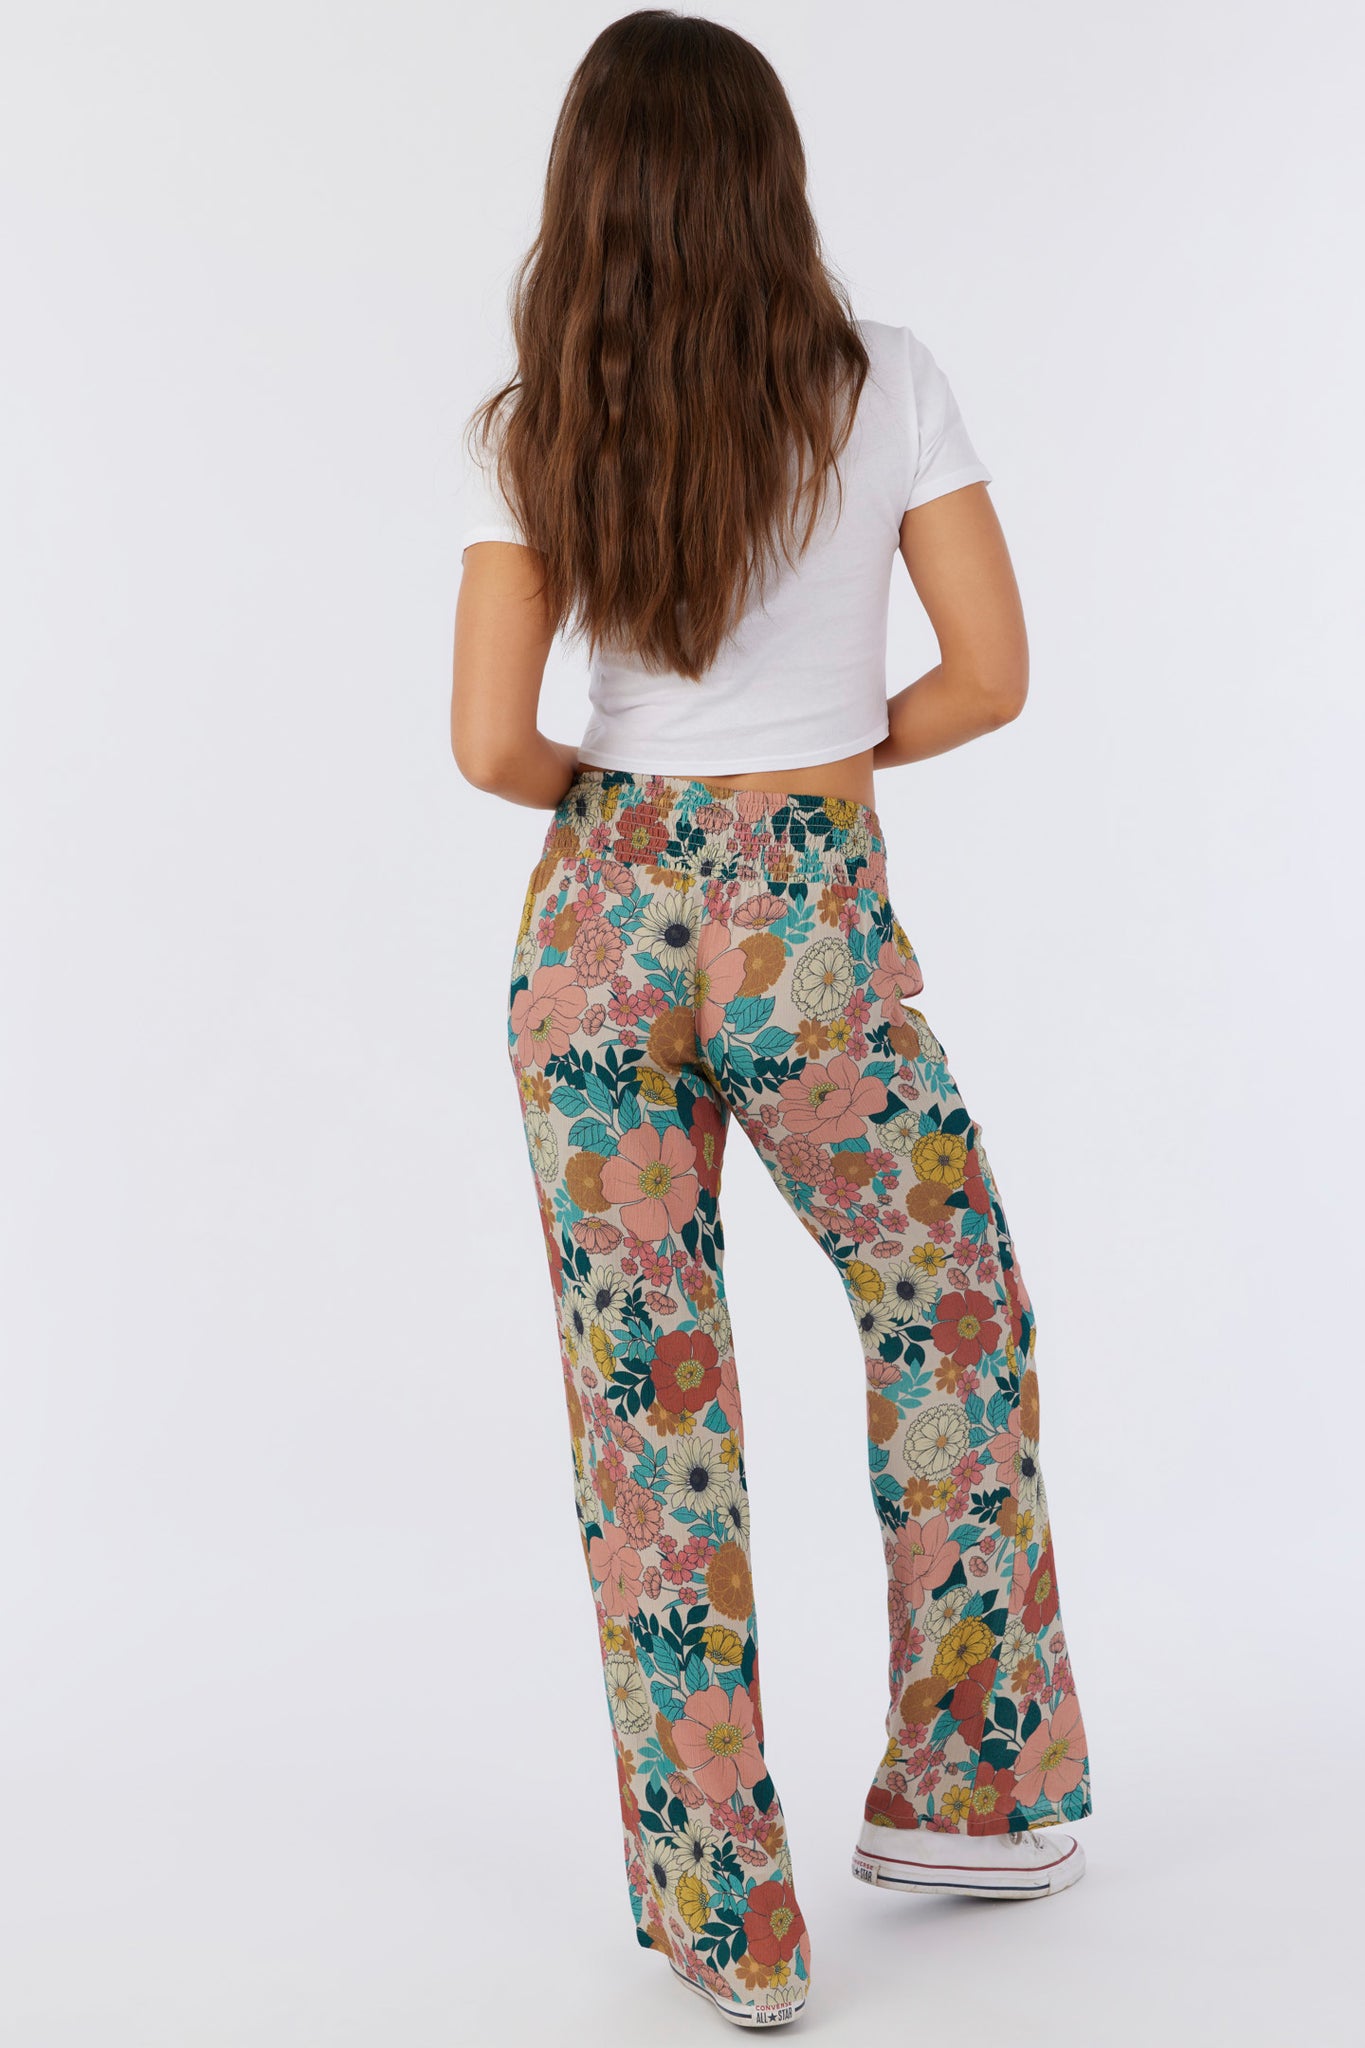 Johnny Tenley Floral Beach Pants - Multi Colored